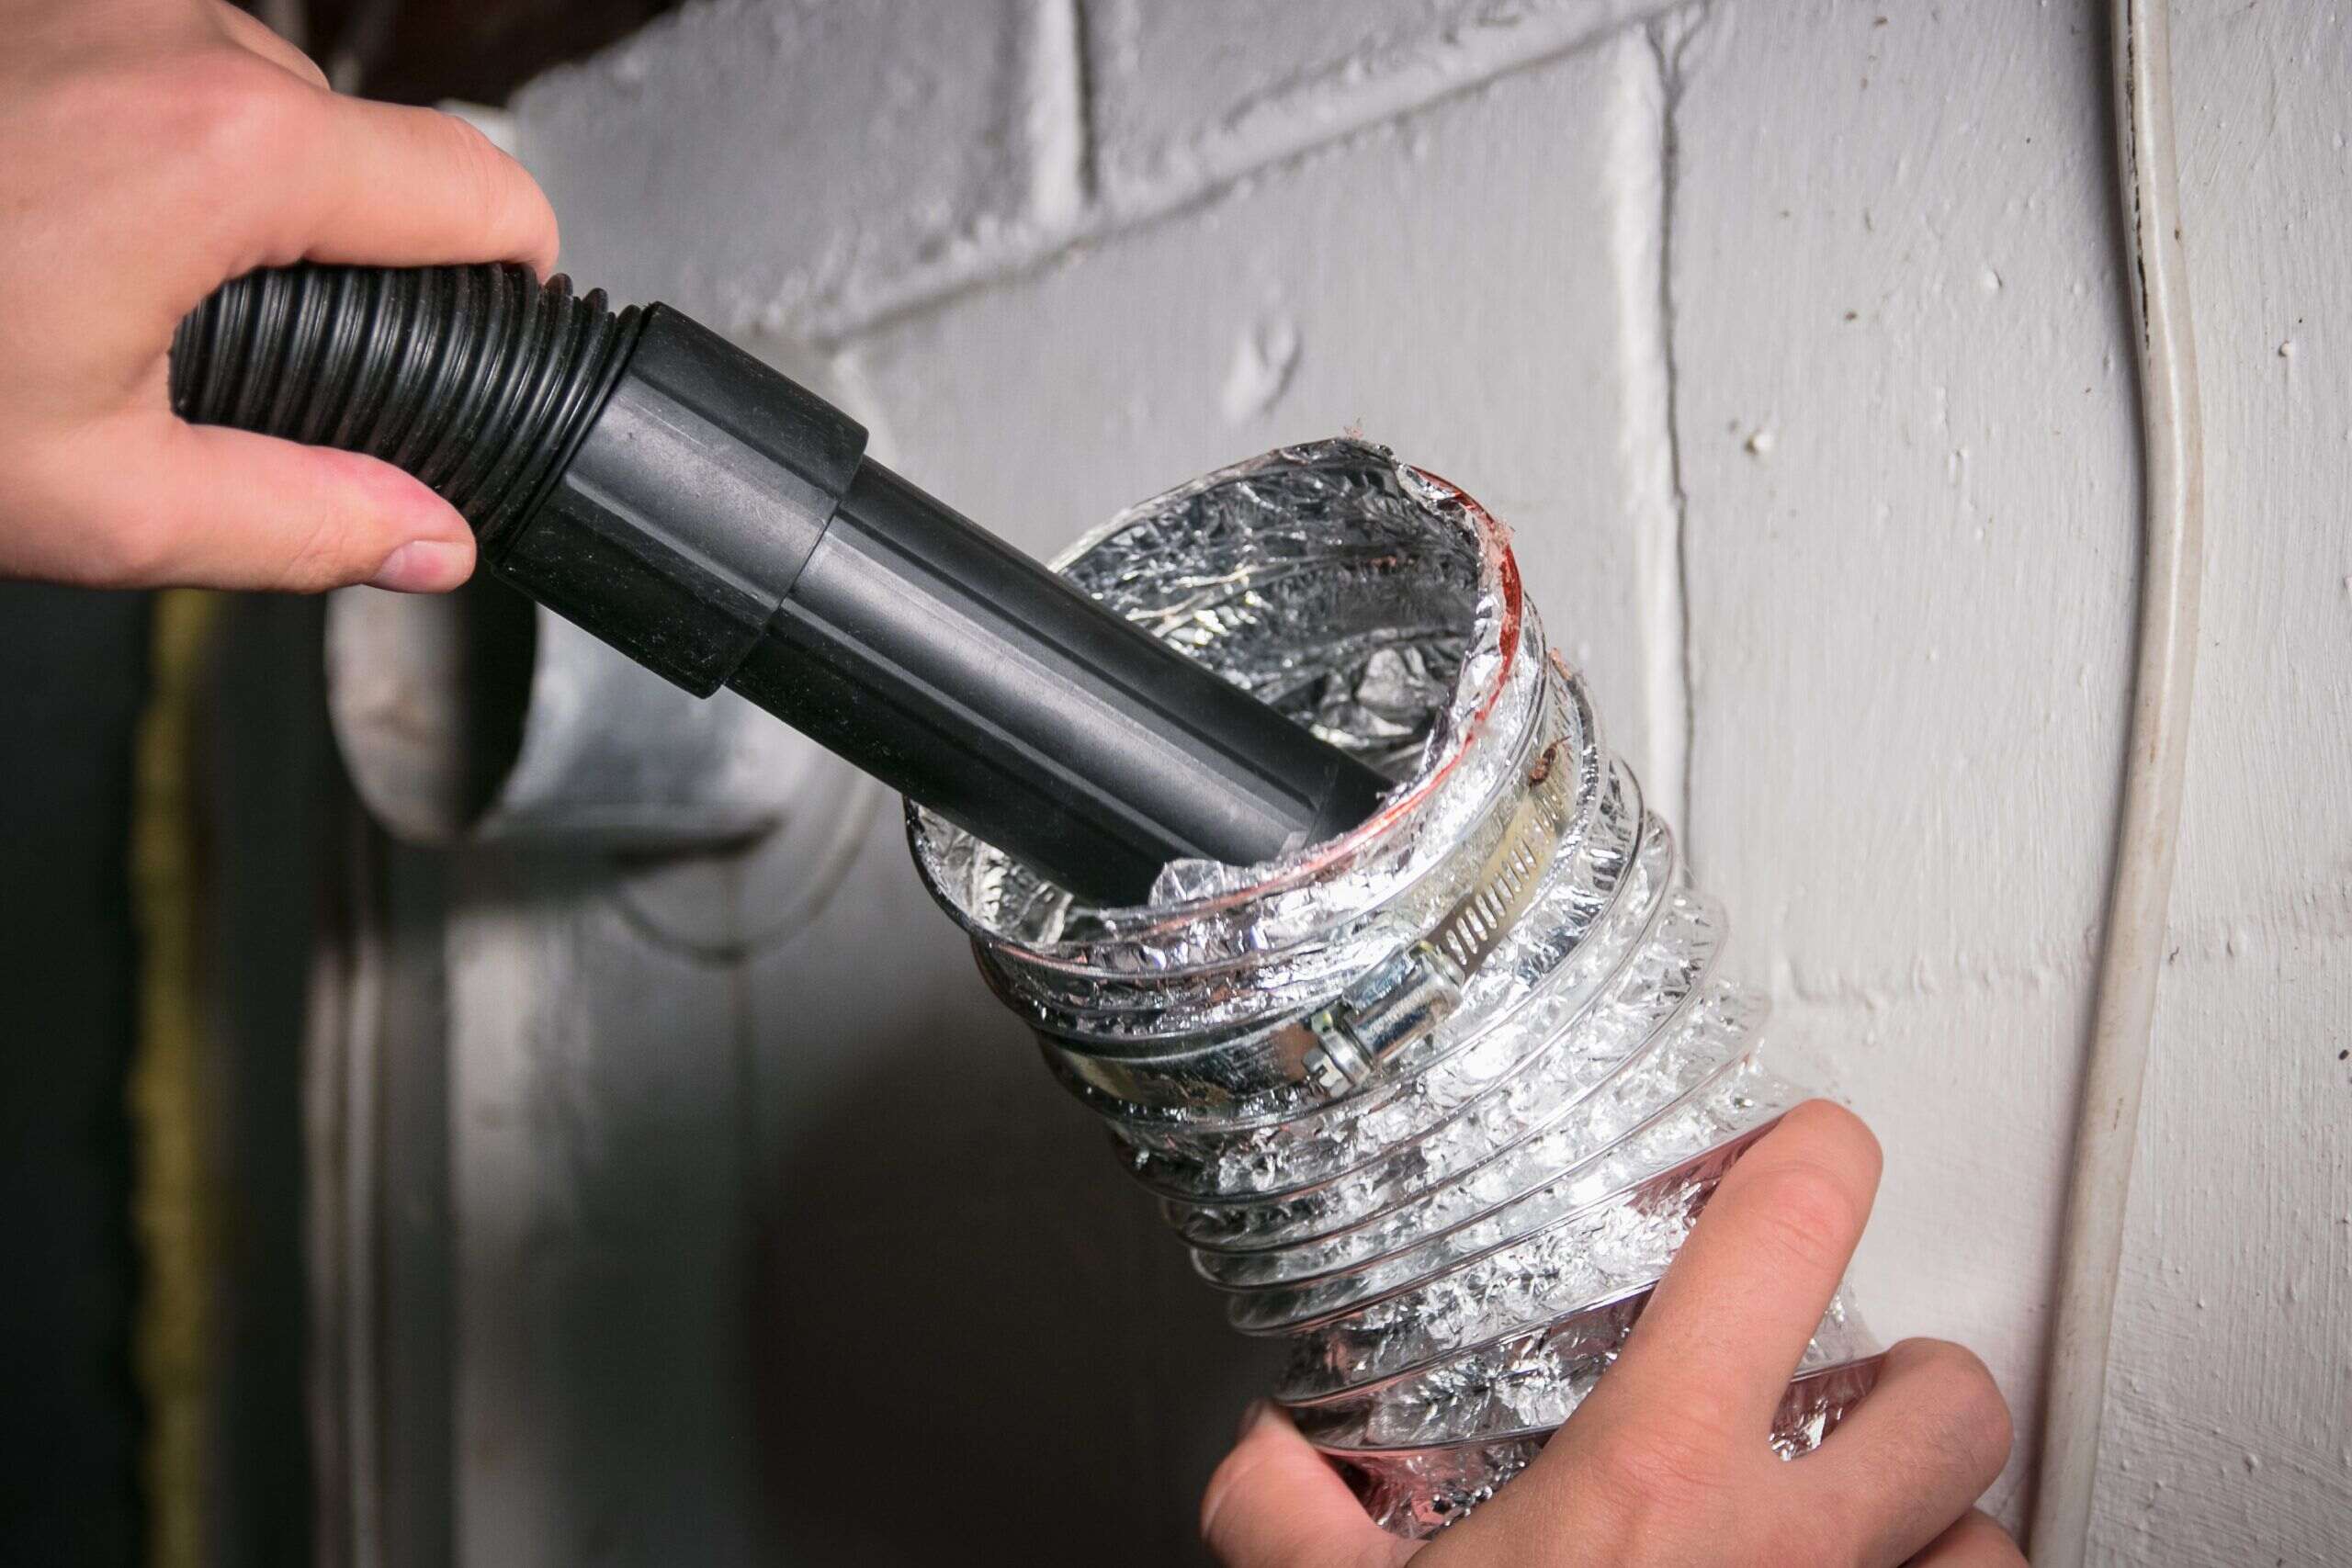 The Professional Dryer Vent Cleaner Kit [20-Feet] Innovative Duct